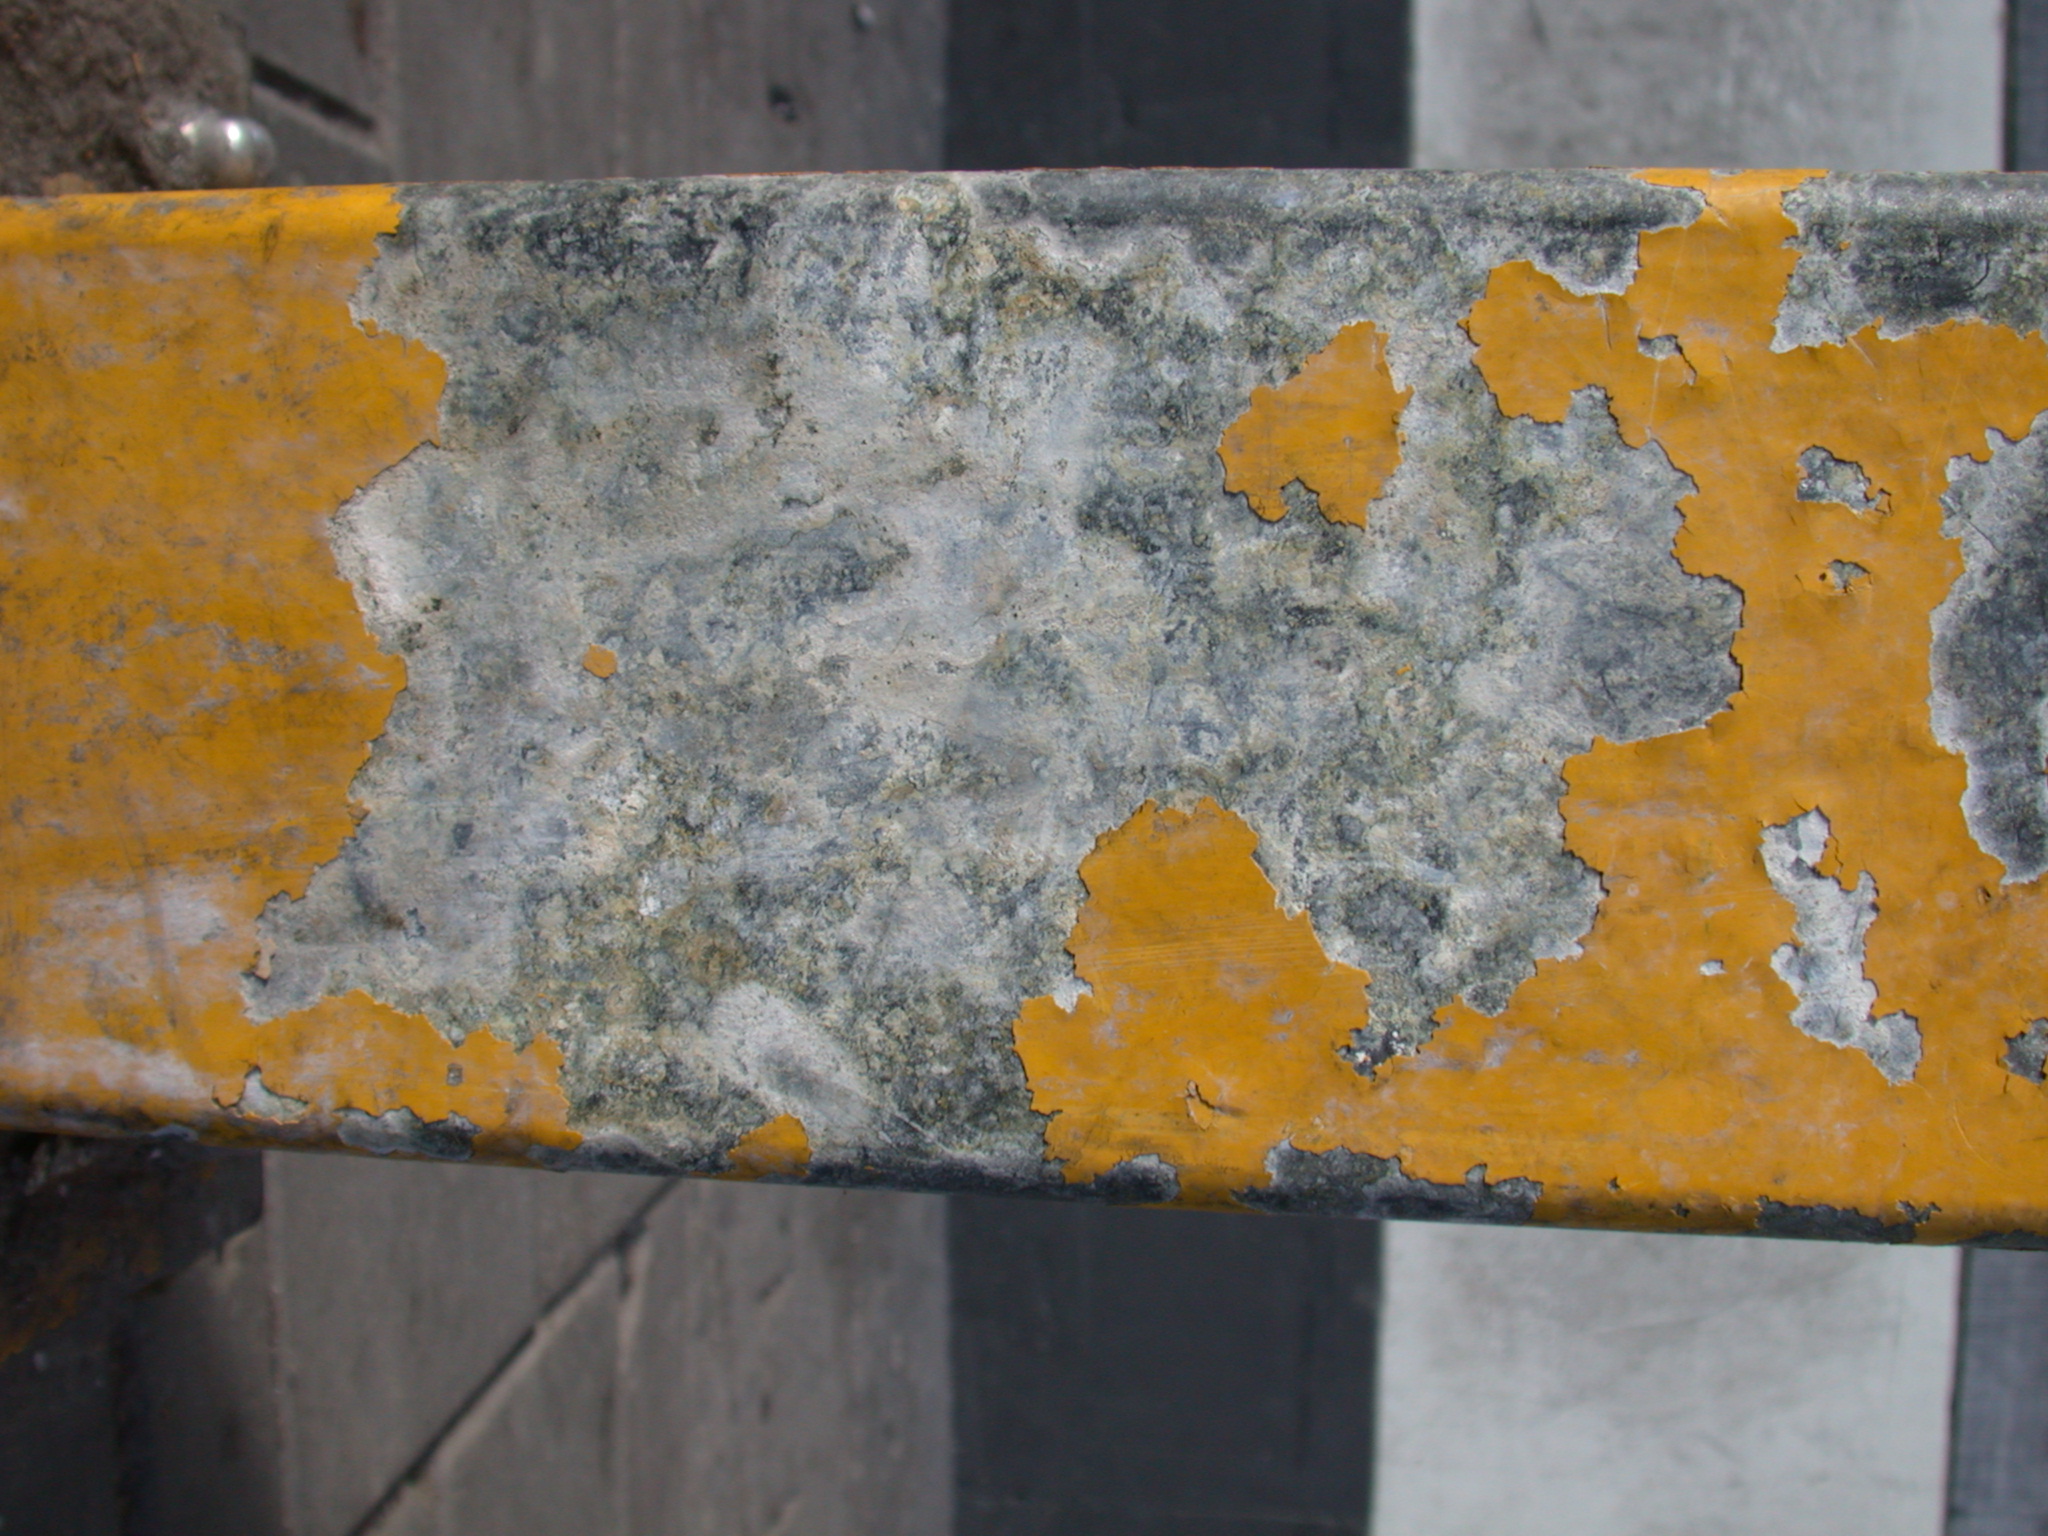 metal beam rusted solid heavy yellow